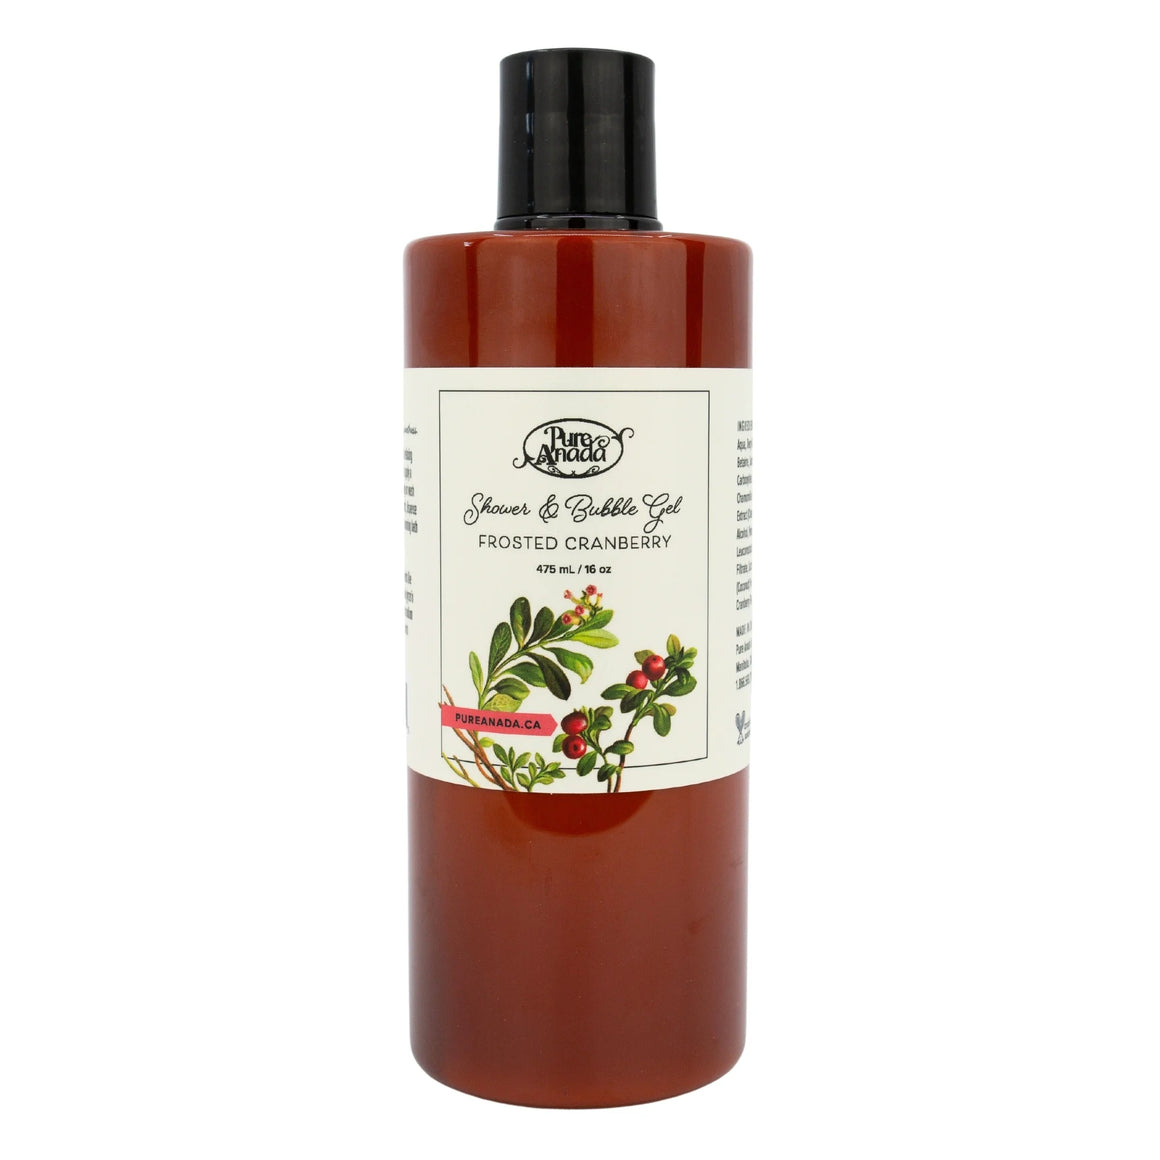 **NEW** Frosted Cranberry Bubble & Shower Gel 475ml - Pure Anada